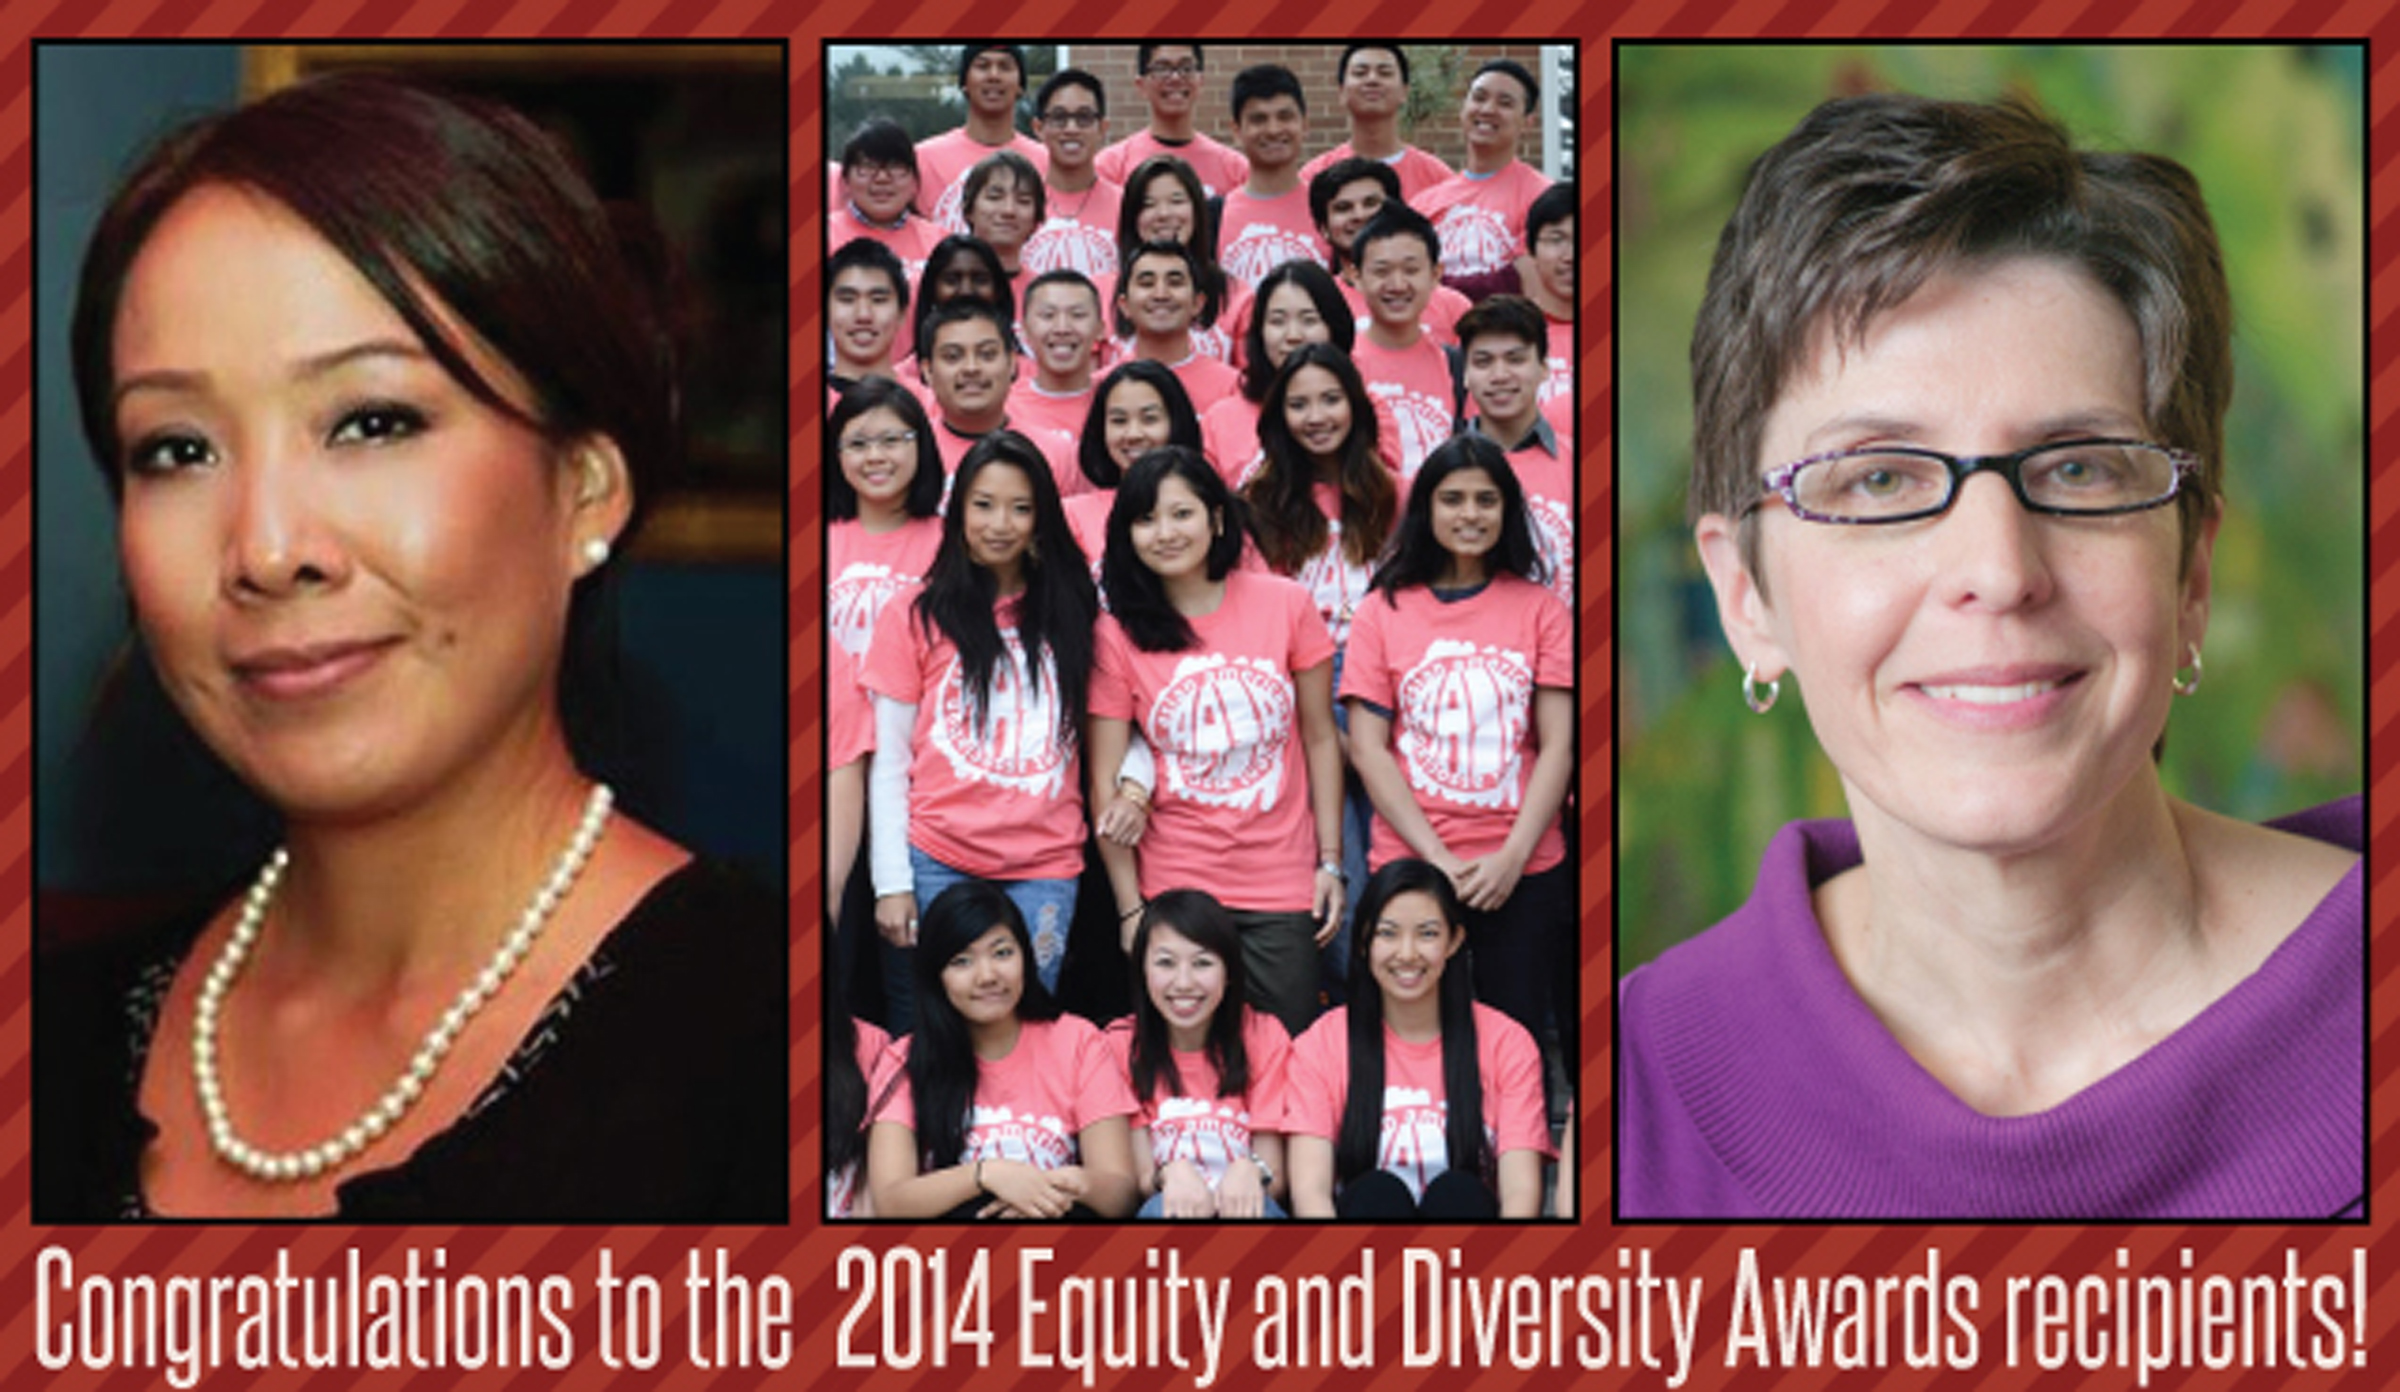 University of Utah doctoral student Samantha Eldridge (left), the Asian American Student Association and professor Mary Burbank will be recognized for their leadership and commitment to enhancing diversity throughout campus with the 2014 Equity and Diversity Awards.